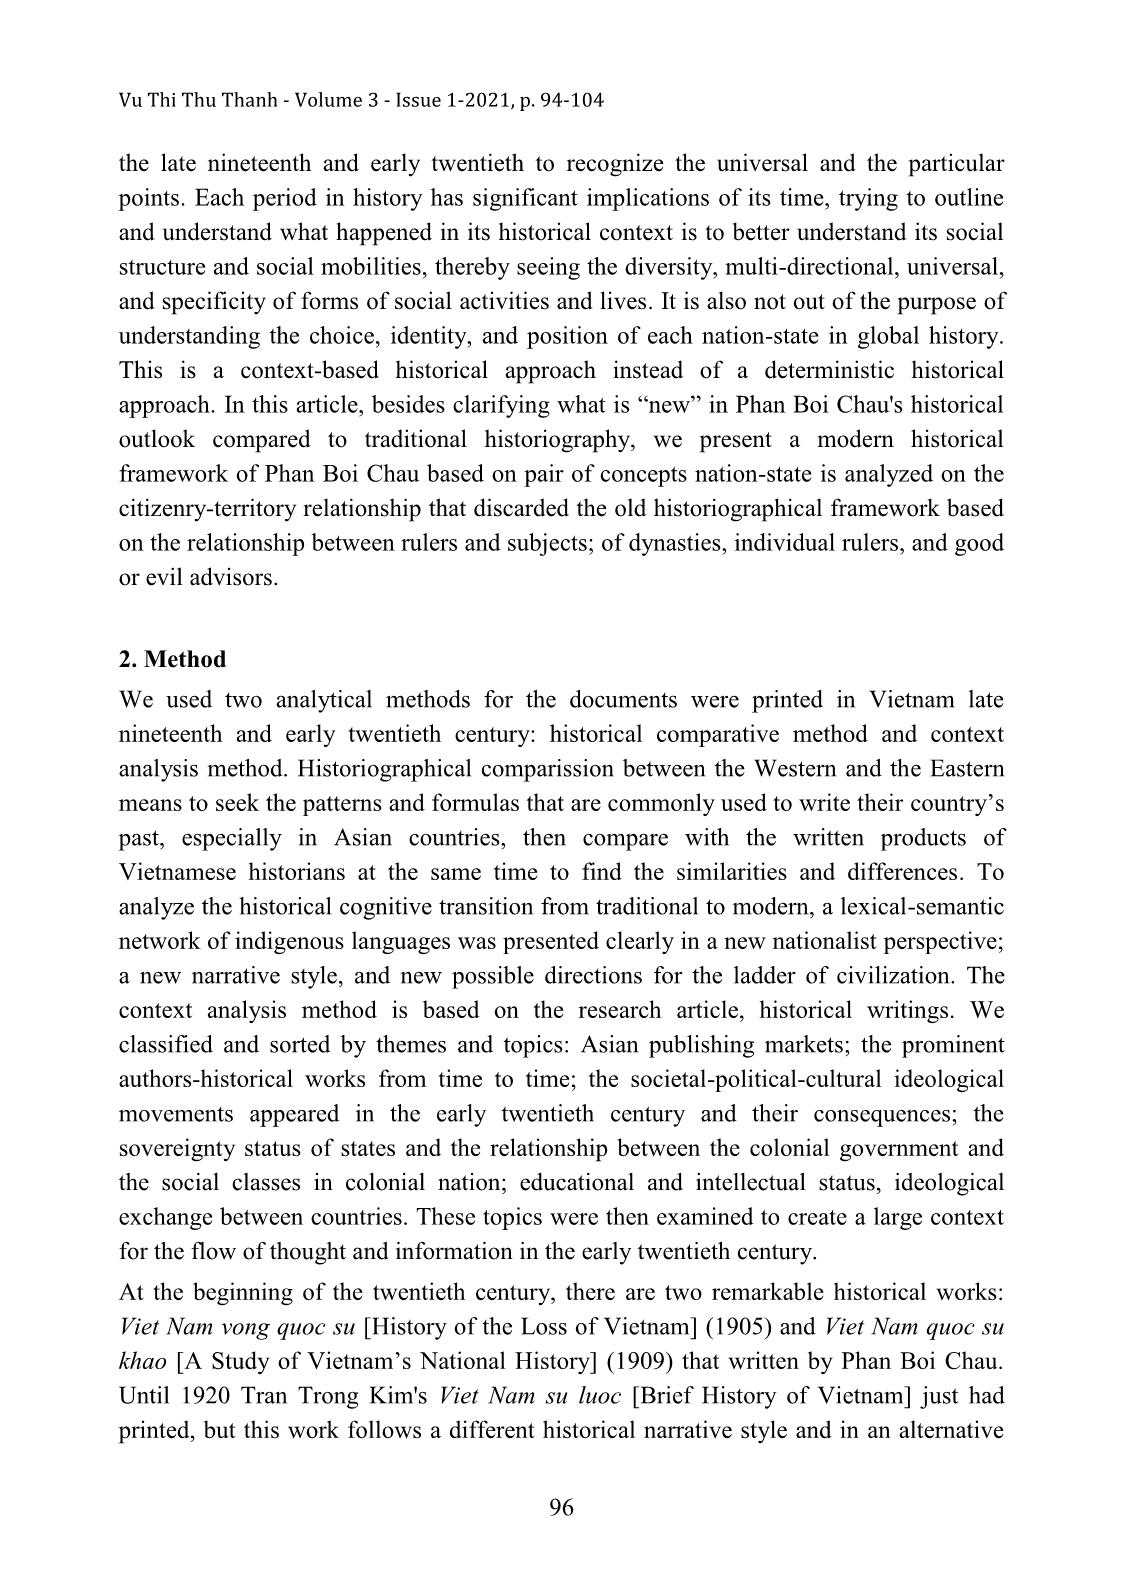 The Shift in historical perception from tradition to modern in Viet Nam in the early twentieth century trang 3